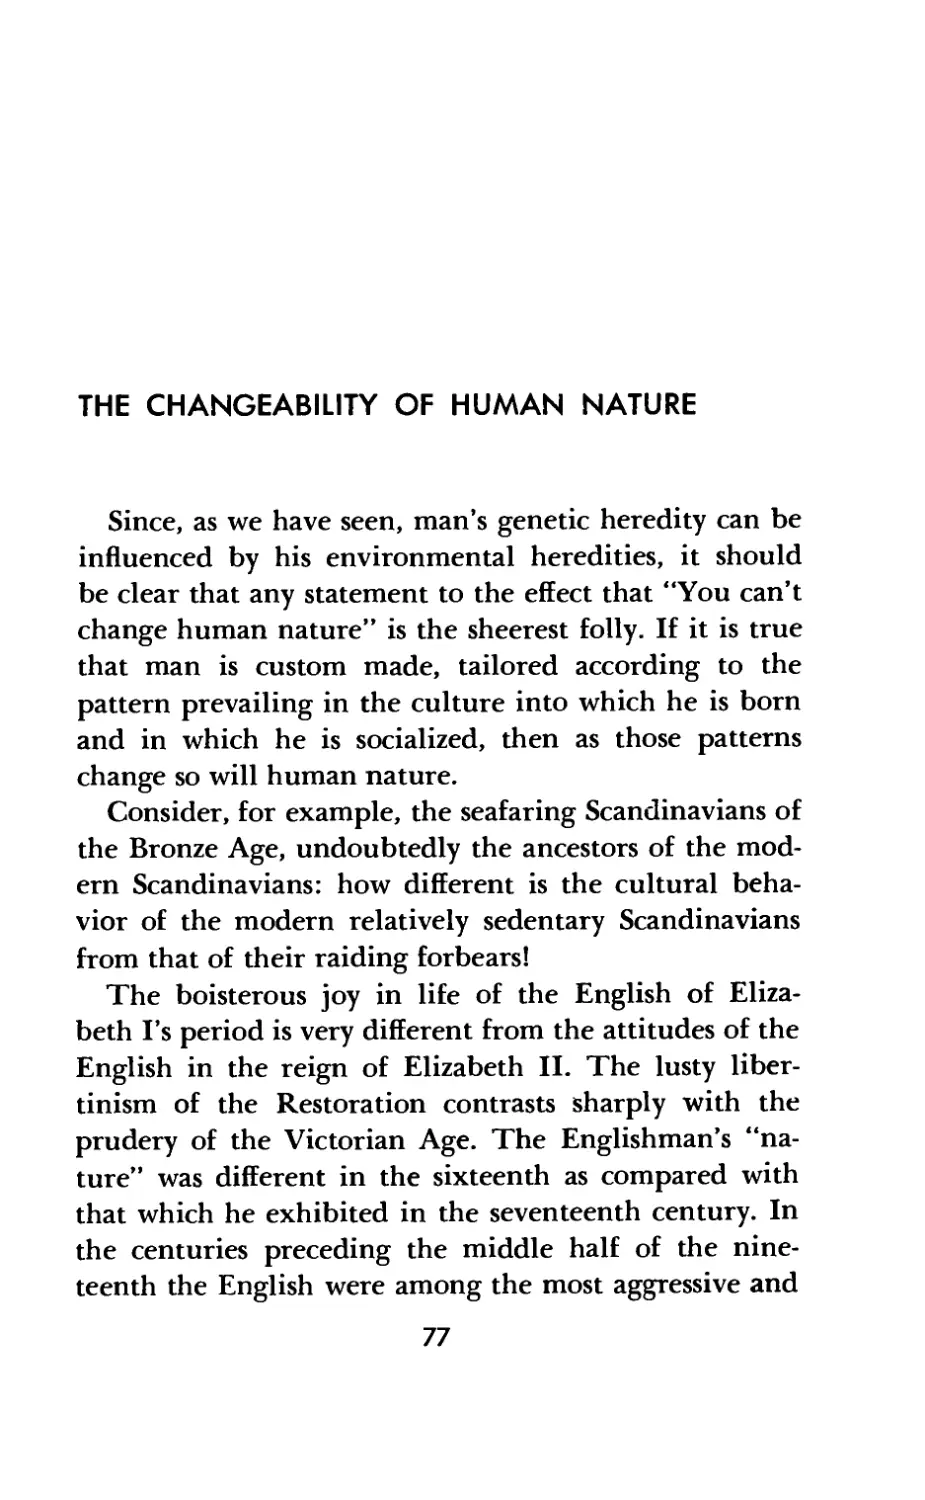 The Changeability of Human Nature